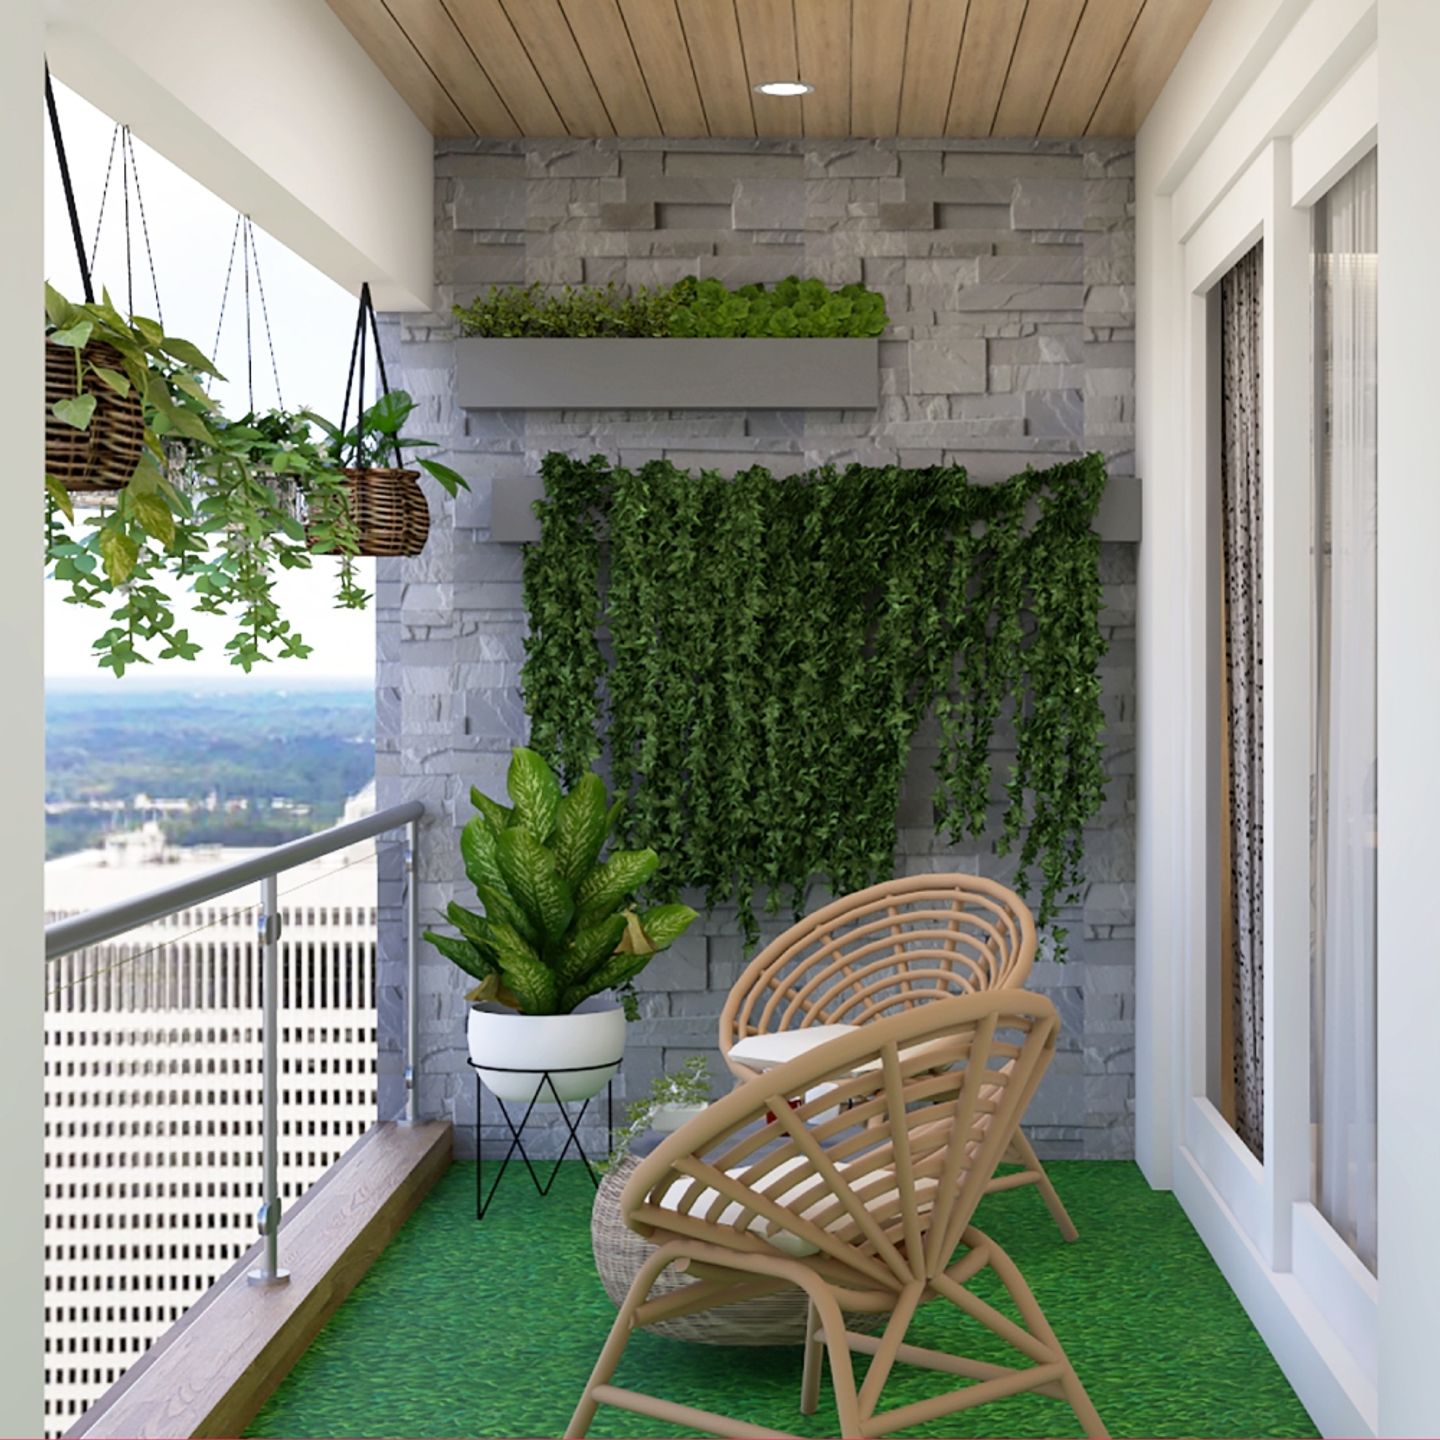 Balcony Design With Stone Wall Cladding - Livspace